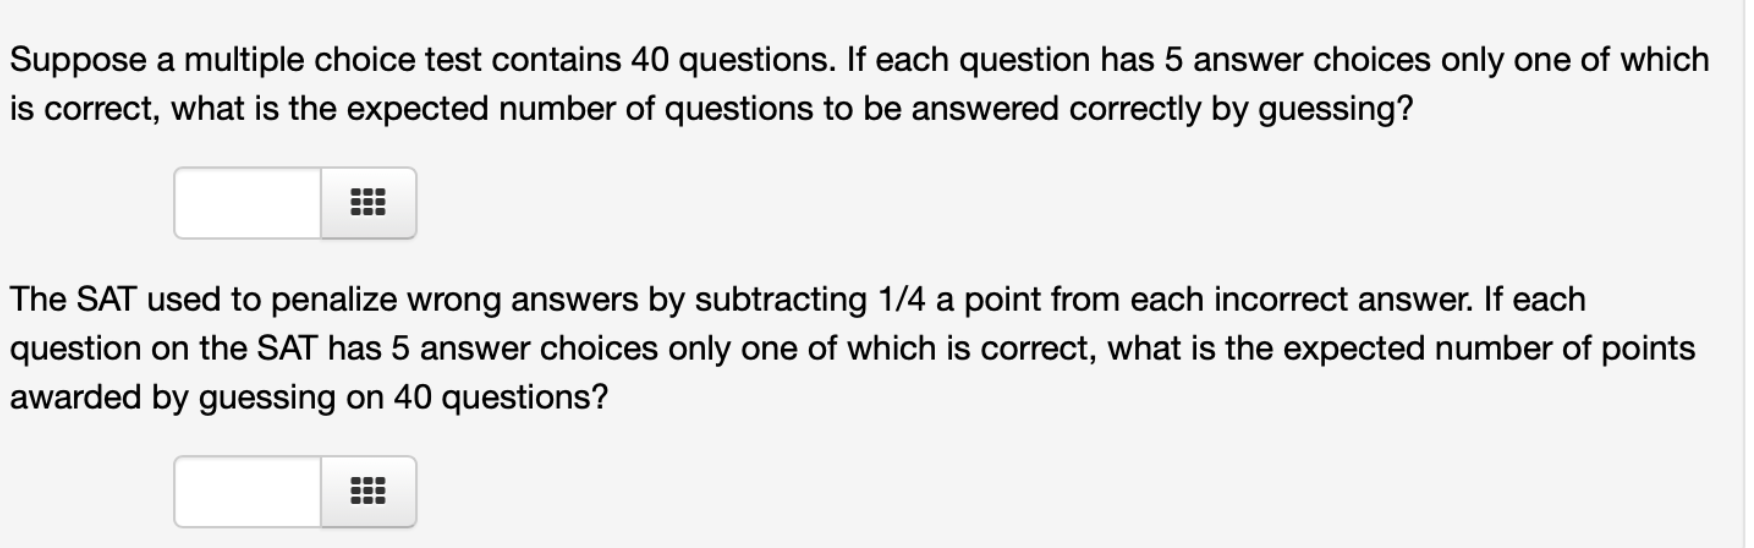 Suppose a multiple choice test contains 40 questions. If each question has 5 answer choices only one of which
is correct, what is the expected number of questions to be answered correctly by guessing?
The SAT used to penalize wrong answers by subtracting 1/4 a point from each incorrect answer. If each
question on the SAT has 5 answer choices only one of which is correct, what is the expected number of points
awarded by guessing on 40 questions?
